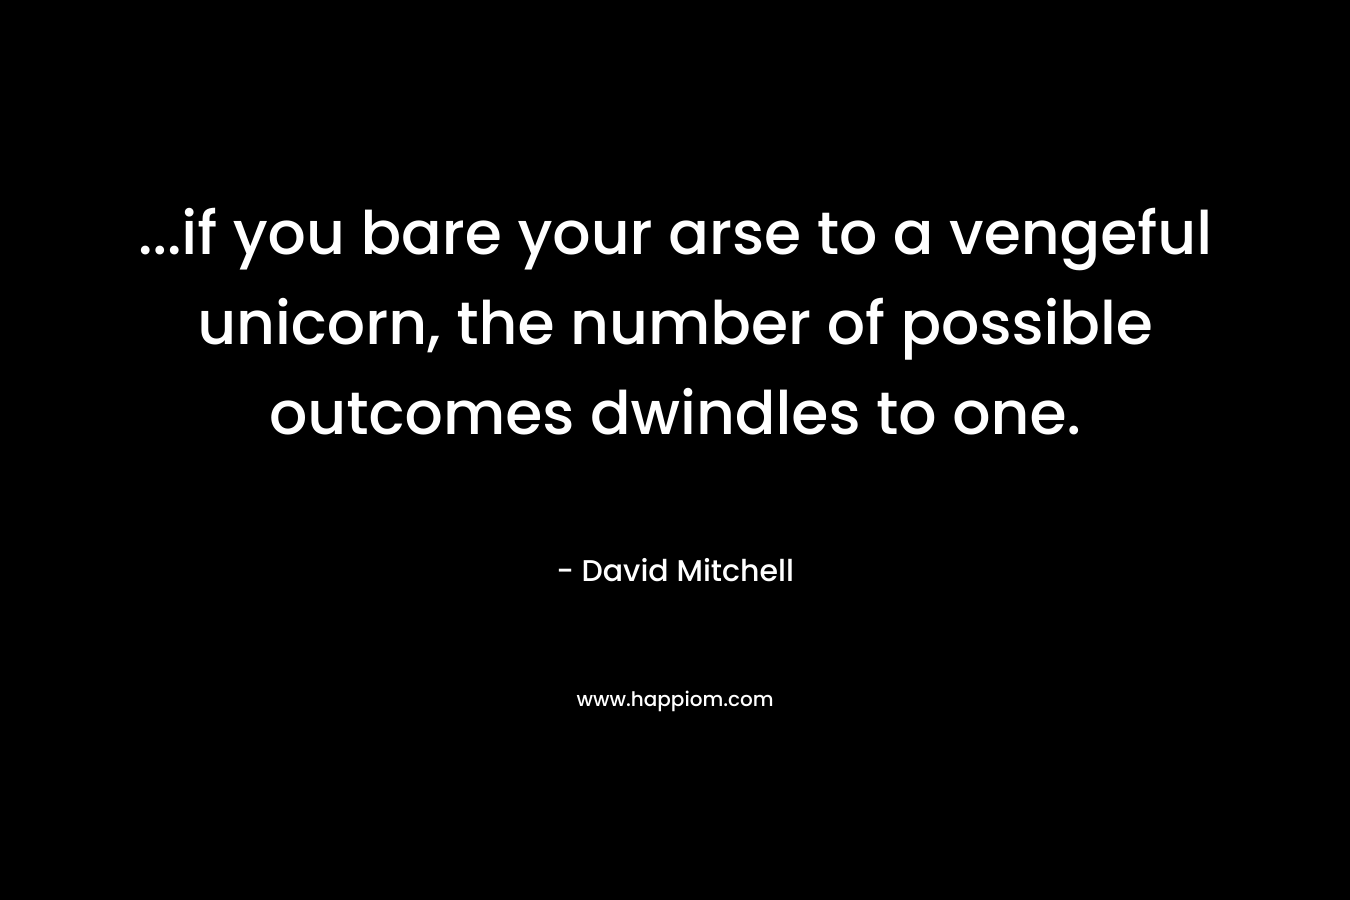 ...if you bare your arse to a vengeful unicorn, the number of possible outcomes dwindles to one.